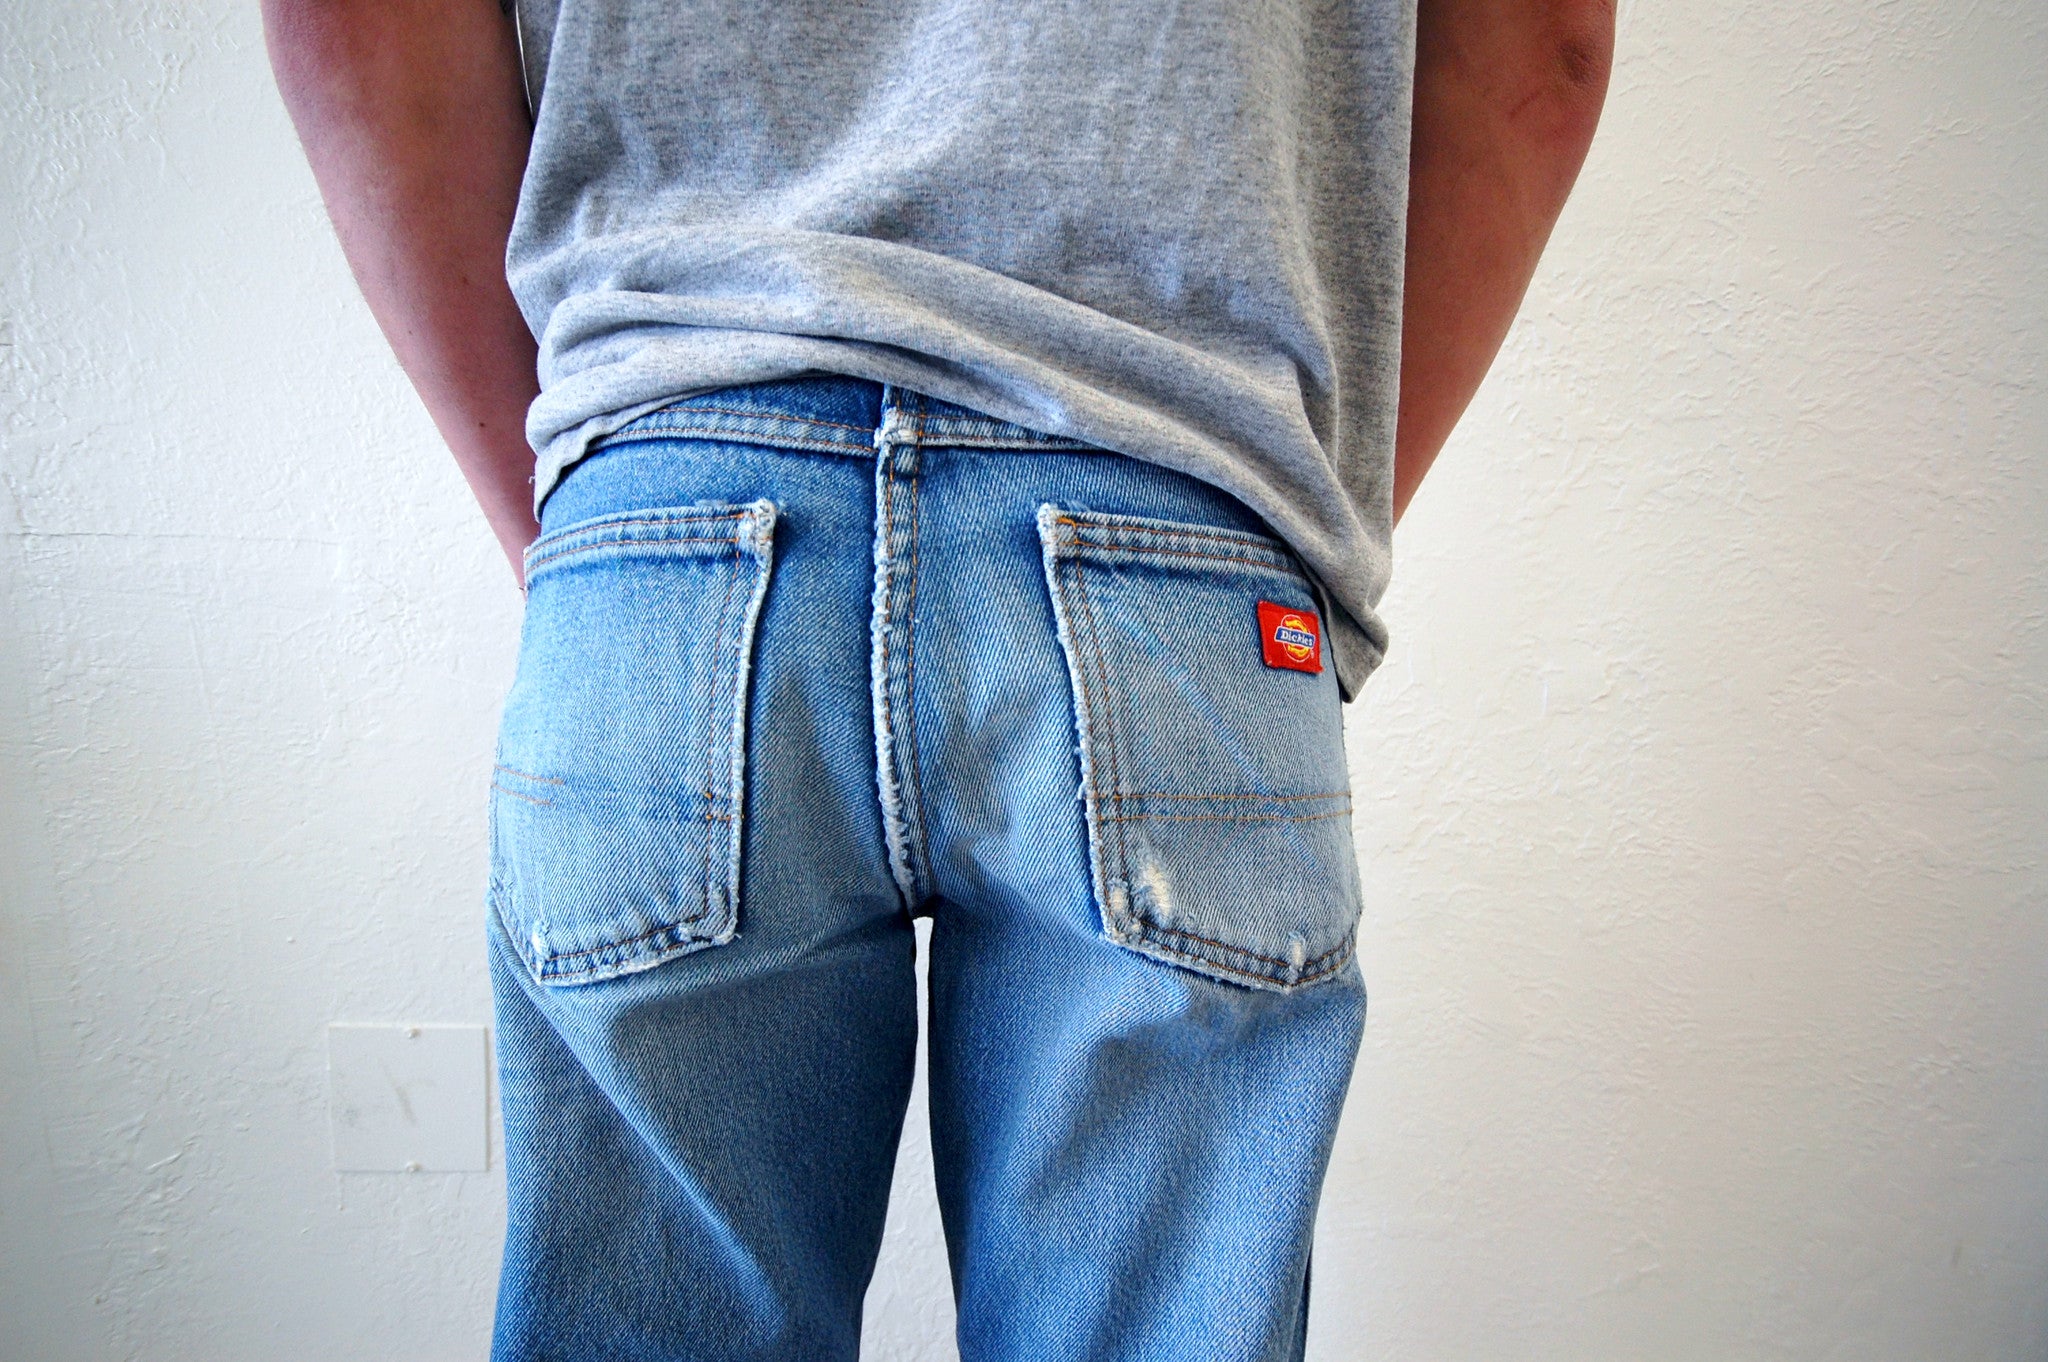 jeans with red tag